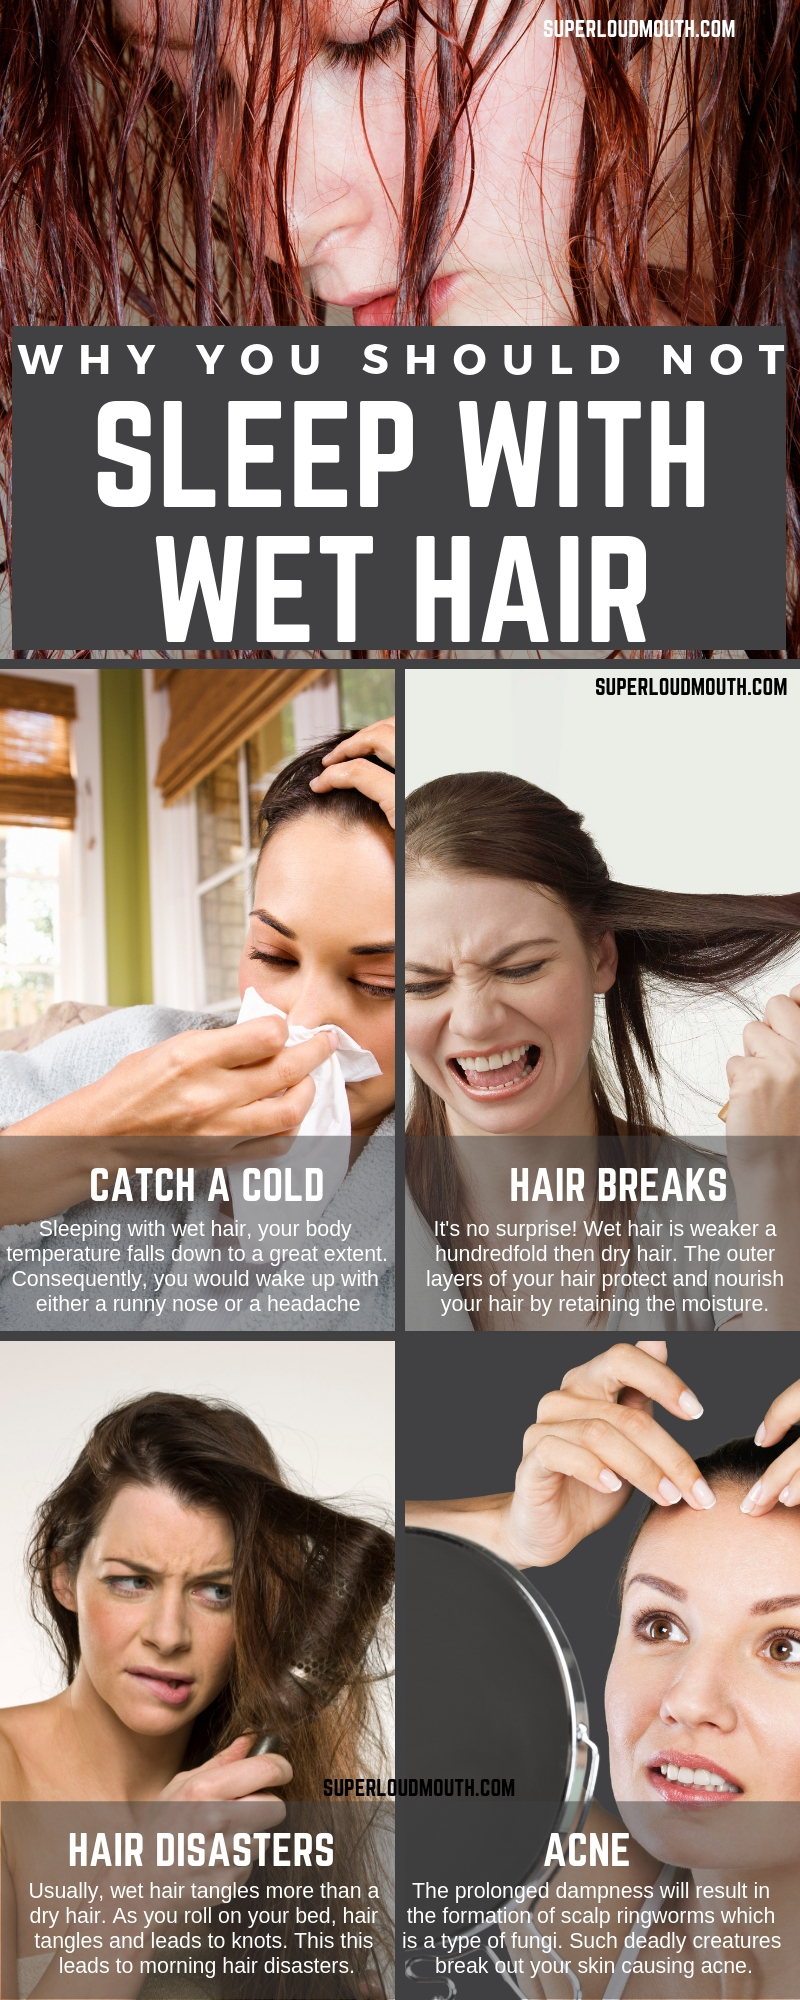 why you should not sleep with wet hair